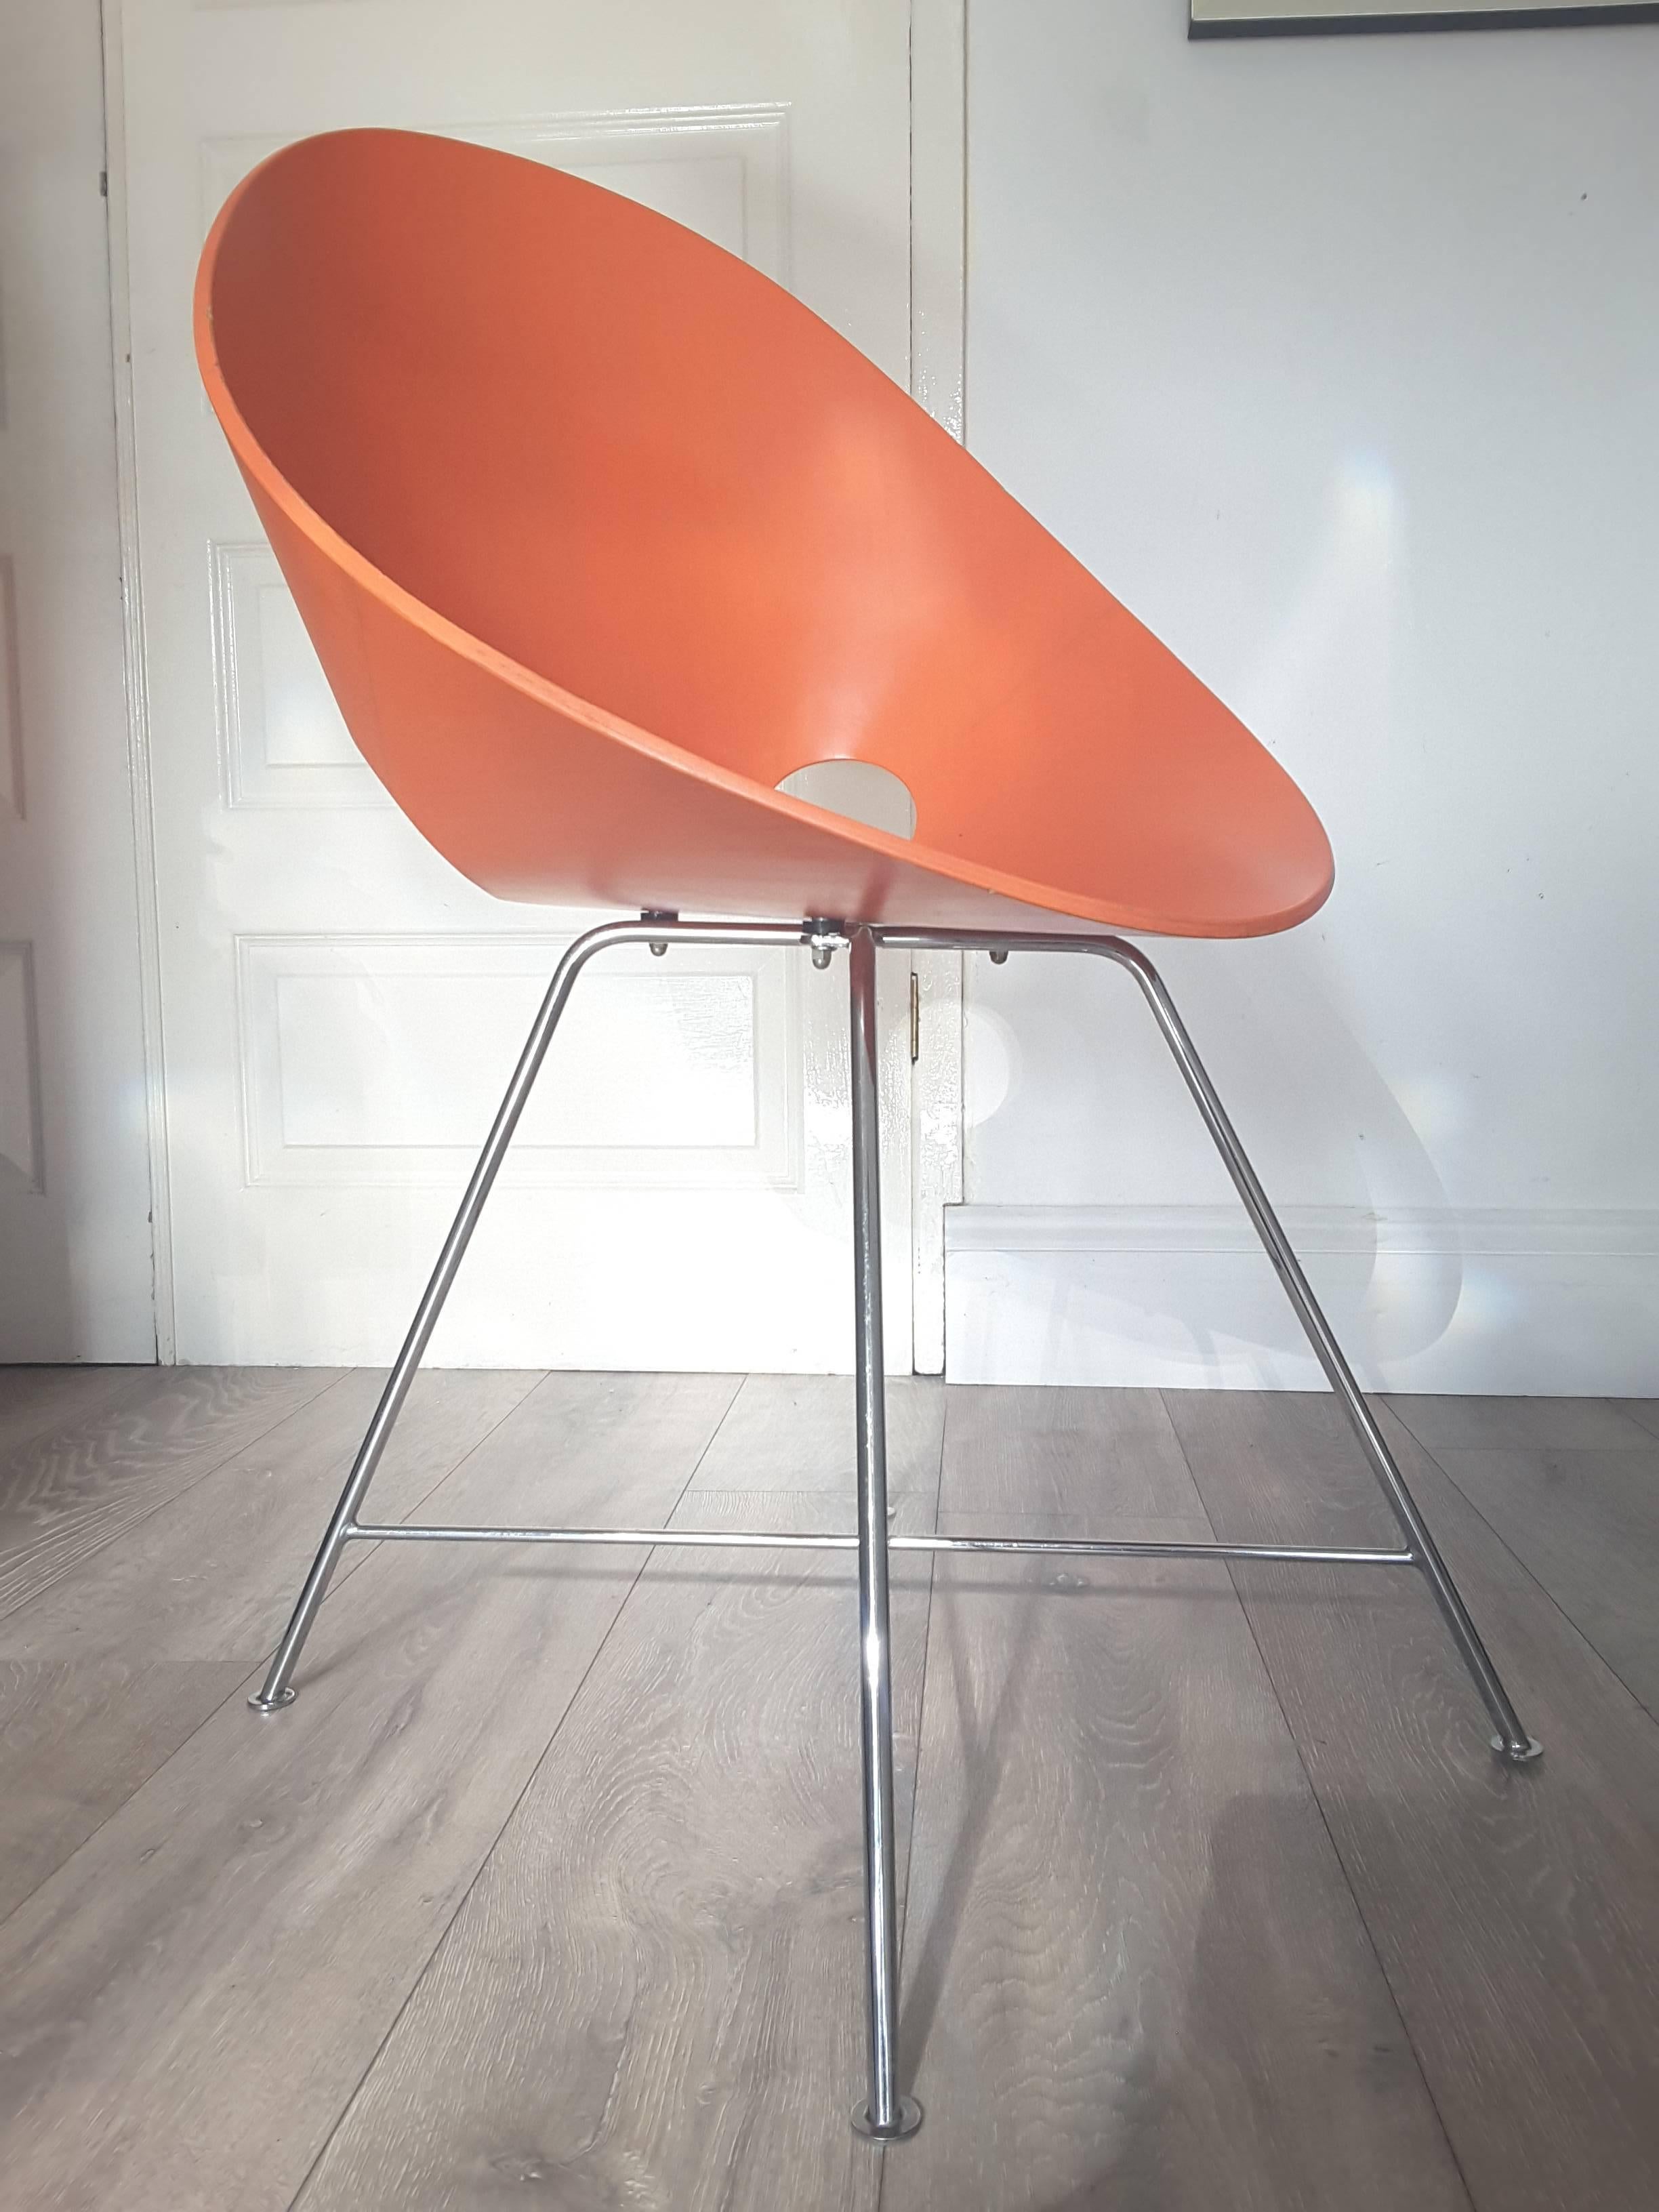 Designed by Eddie Harlis for Thonet. Bent plywood shell in original orange with chromed base. Excellent condition with only minor rub marks to edges. Retains Thonet label. The base unscrews easily for safe shipping. Pair available.